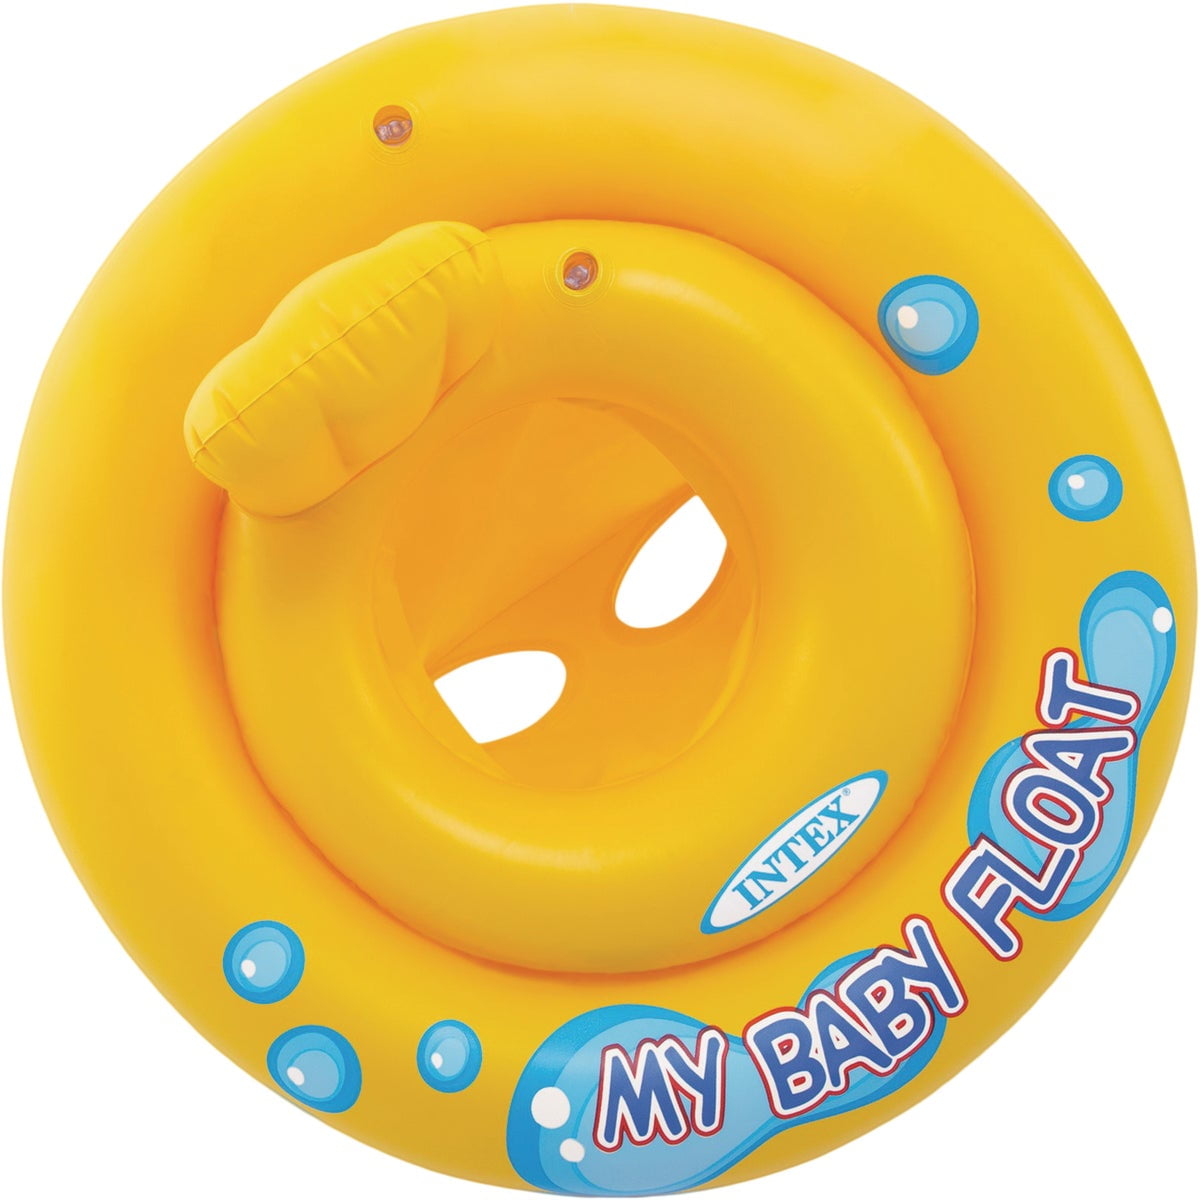 Toddler "27" Baby Float Swim Seat Support Pool Inflatable Aid Ring Pool By Intex 